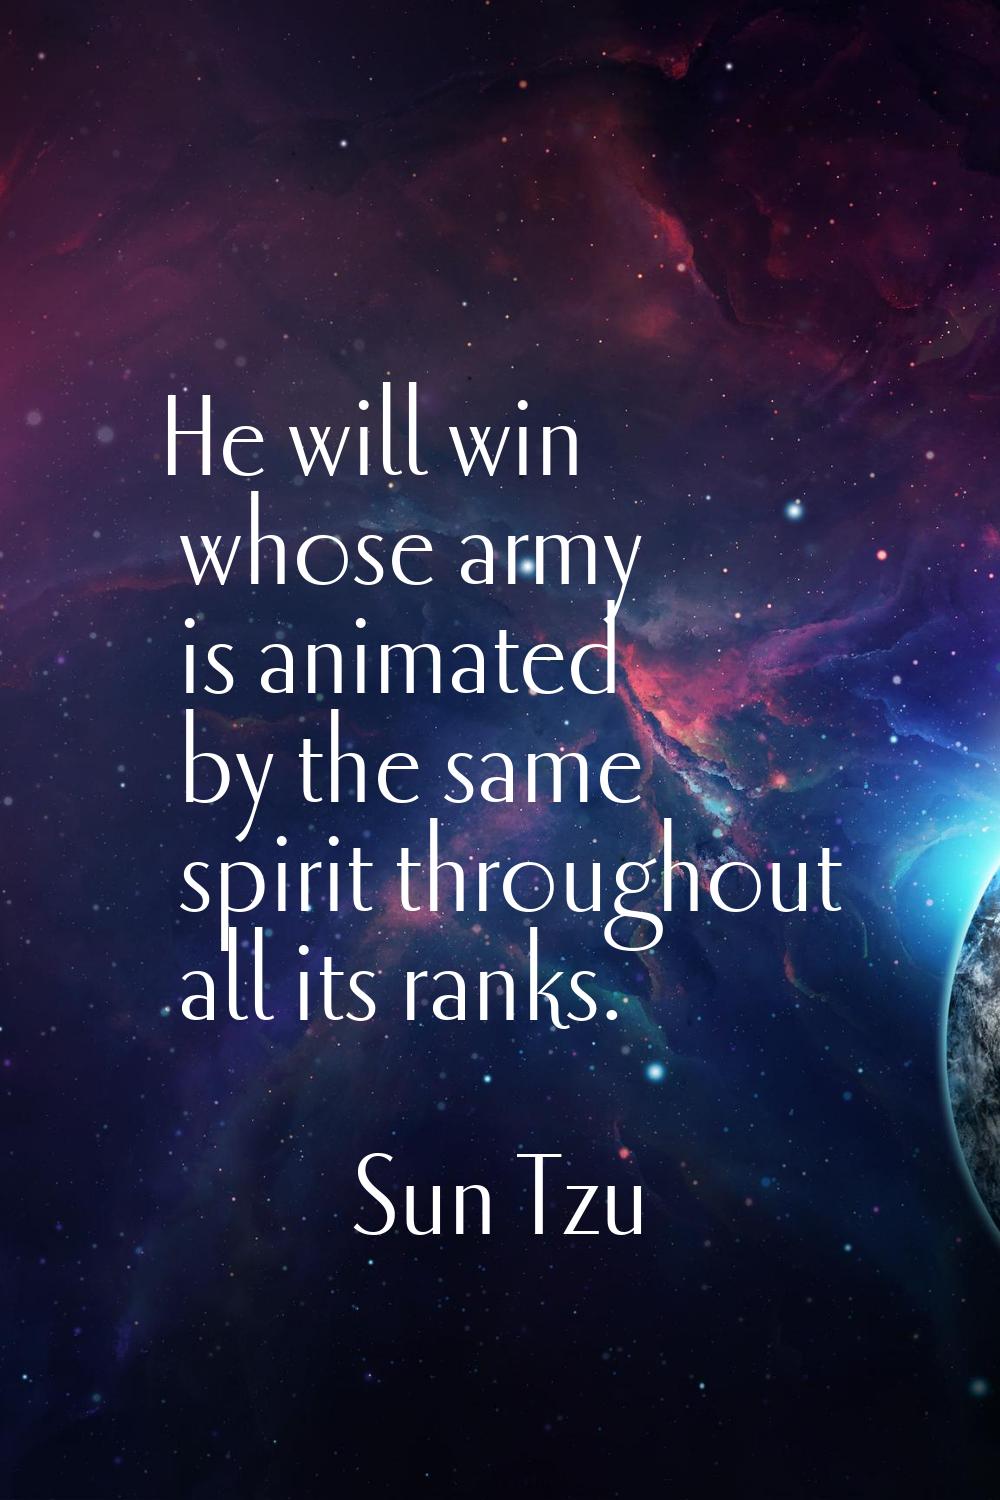 He will win whose army is animated by the same spirit throughout all its ranks.